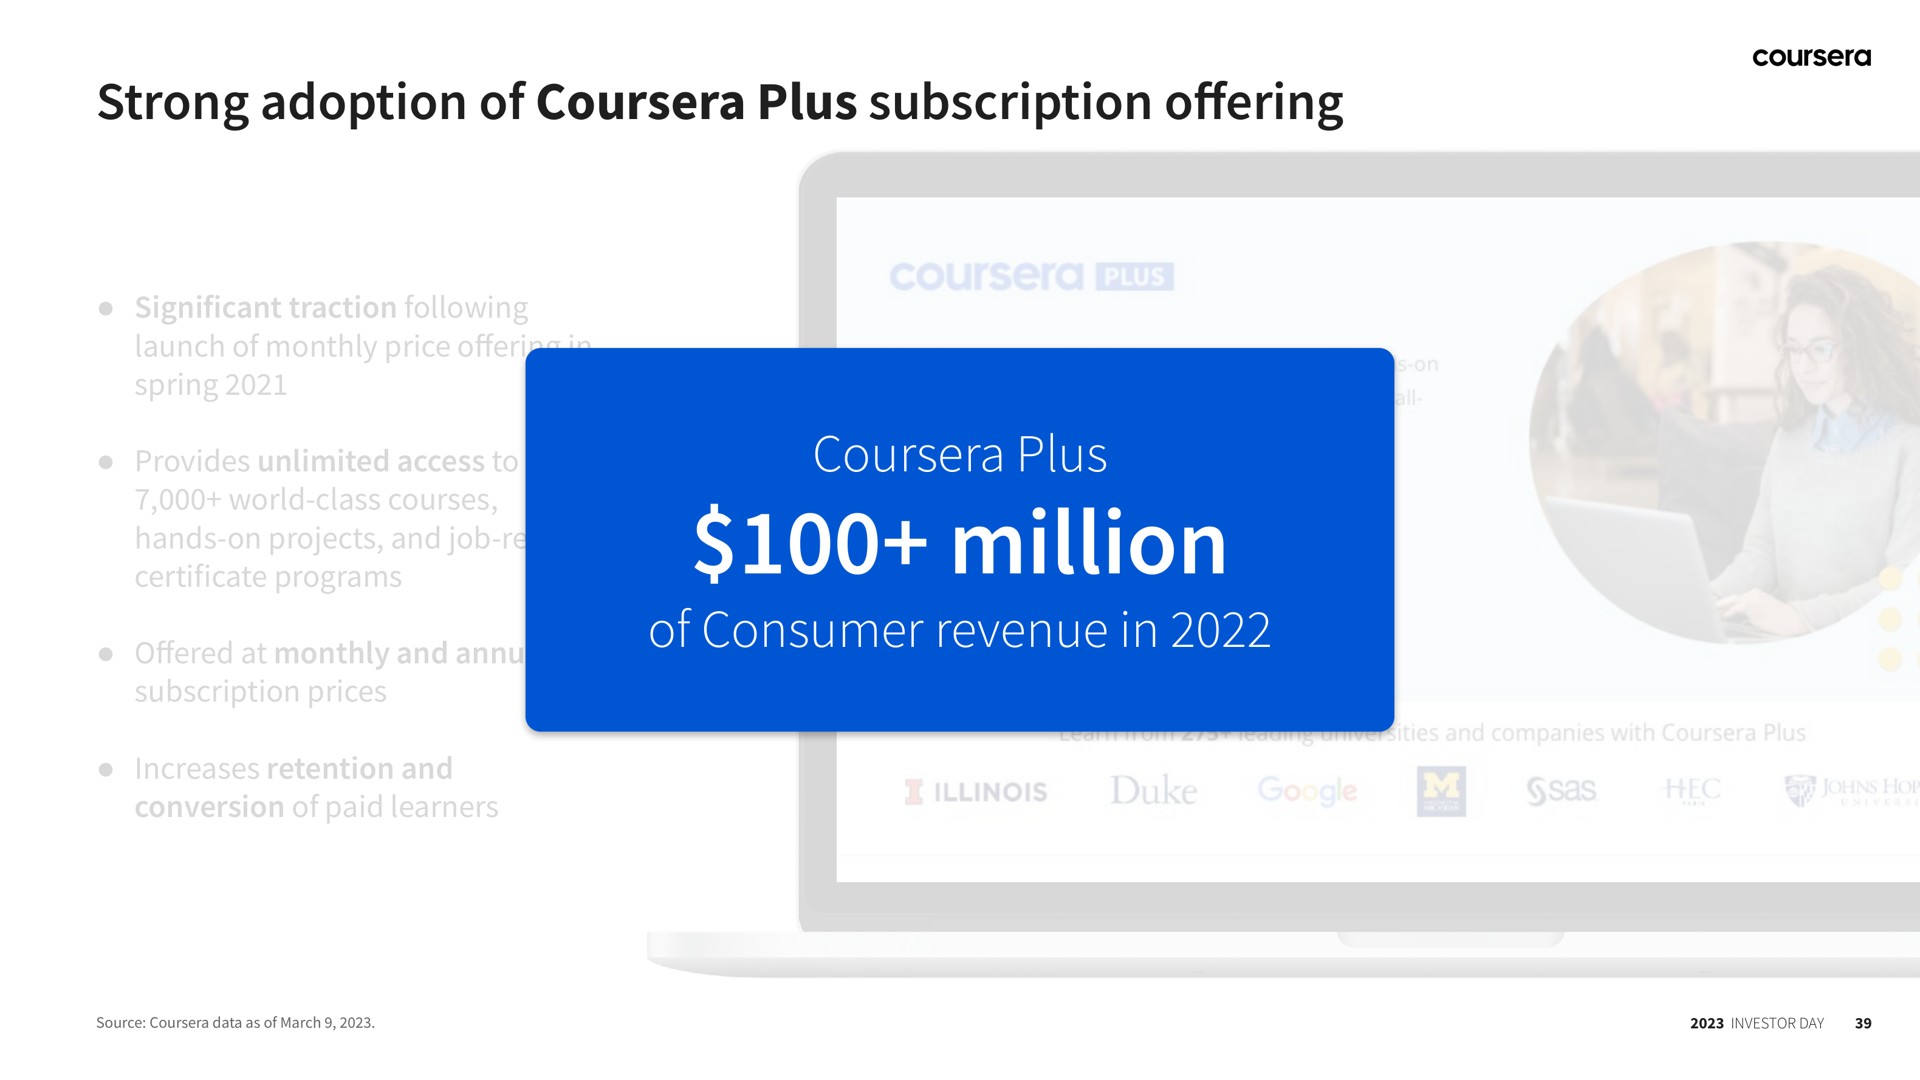 strong adoption of plus subscription plus million of consumer revenue in offering | Coursera